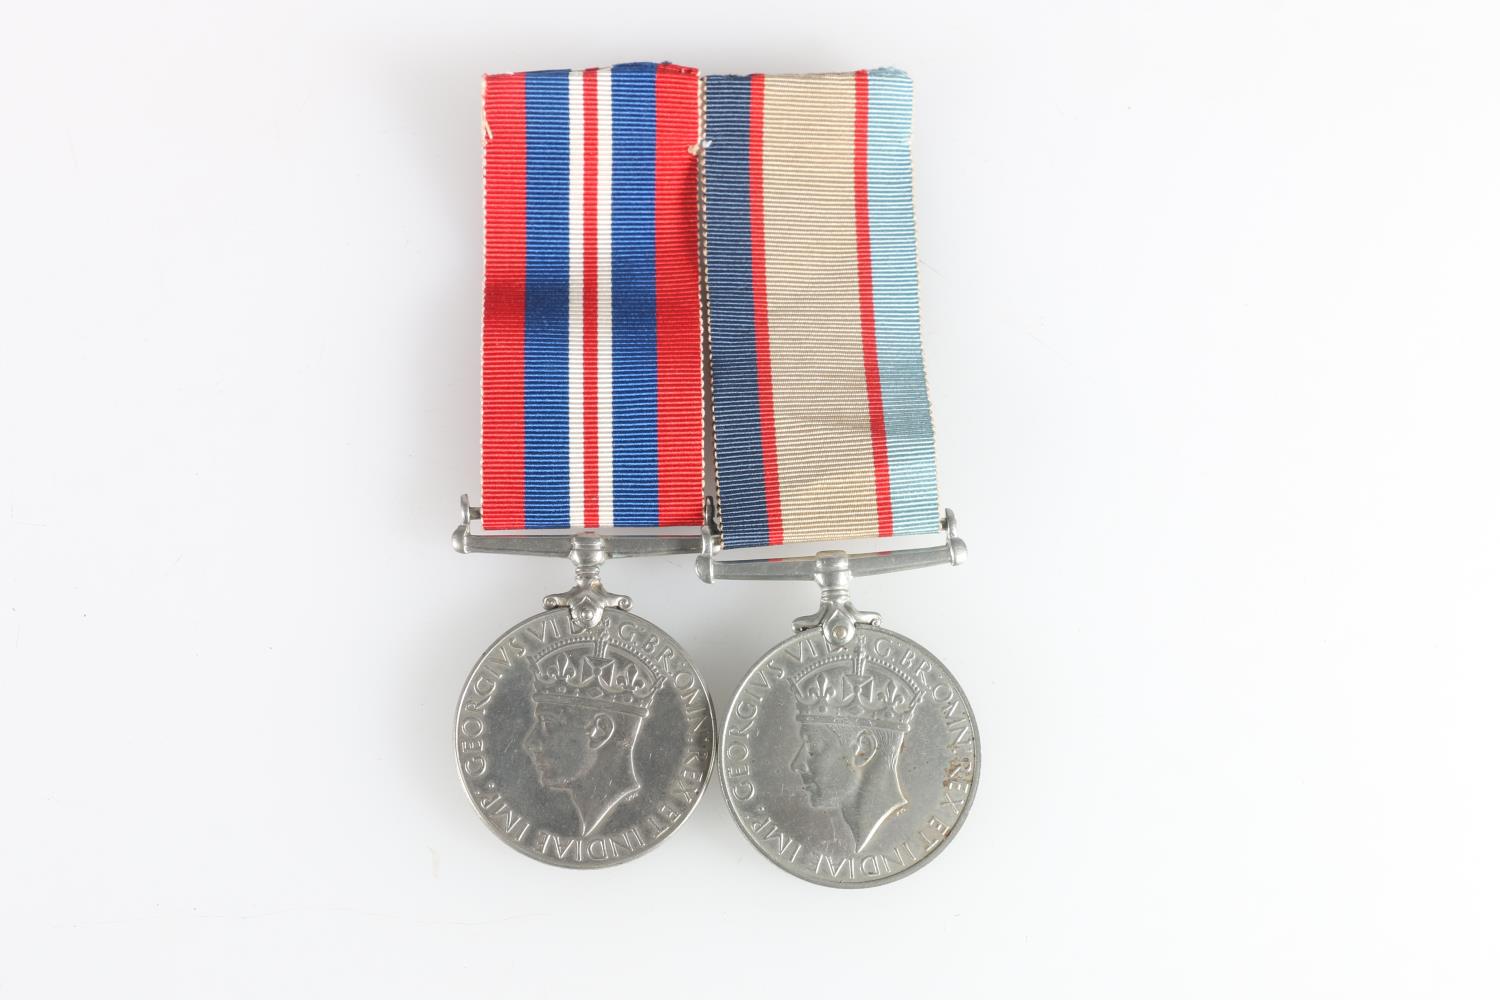 WWII medal pair comprising a George VI Australia Service medal [108899 ANDERSON AM] and British